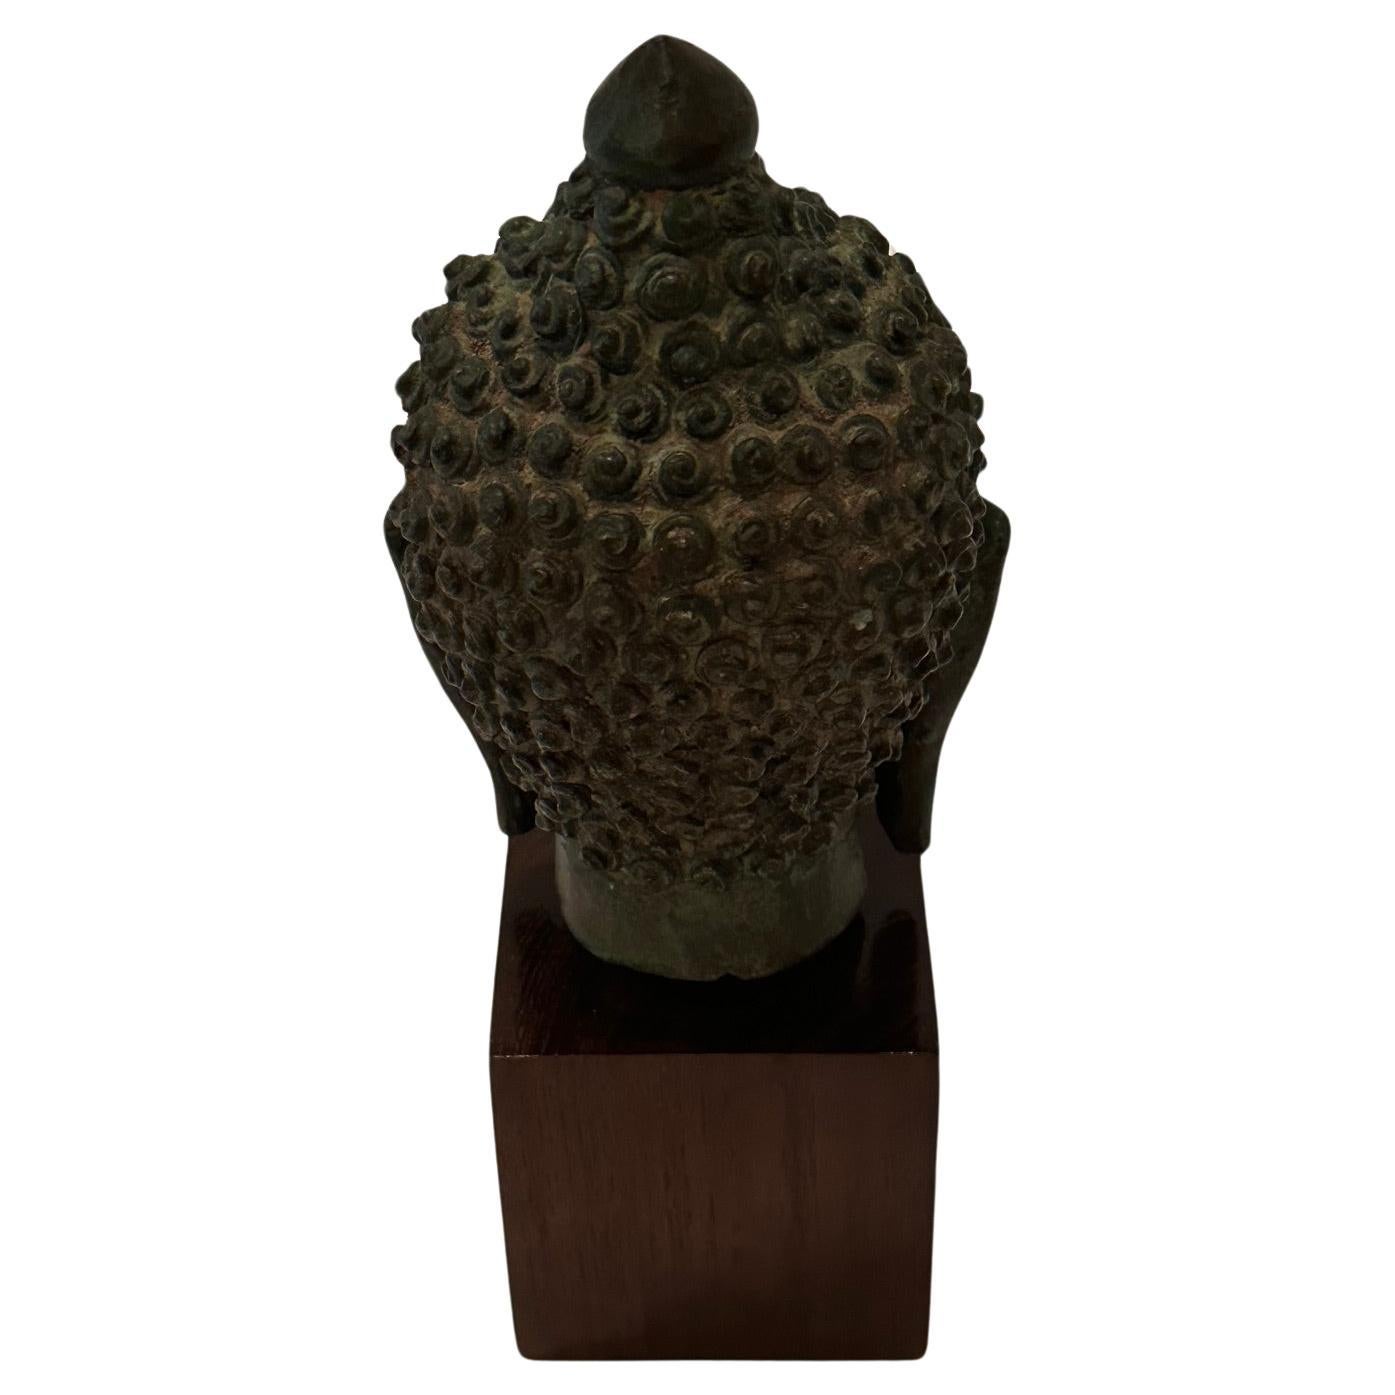 Lovely small Thai Buddha head sculpture in bronze with beautiful patina and mounted on a wooden cube.